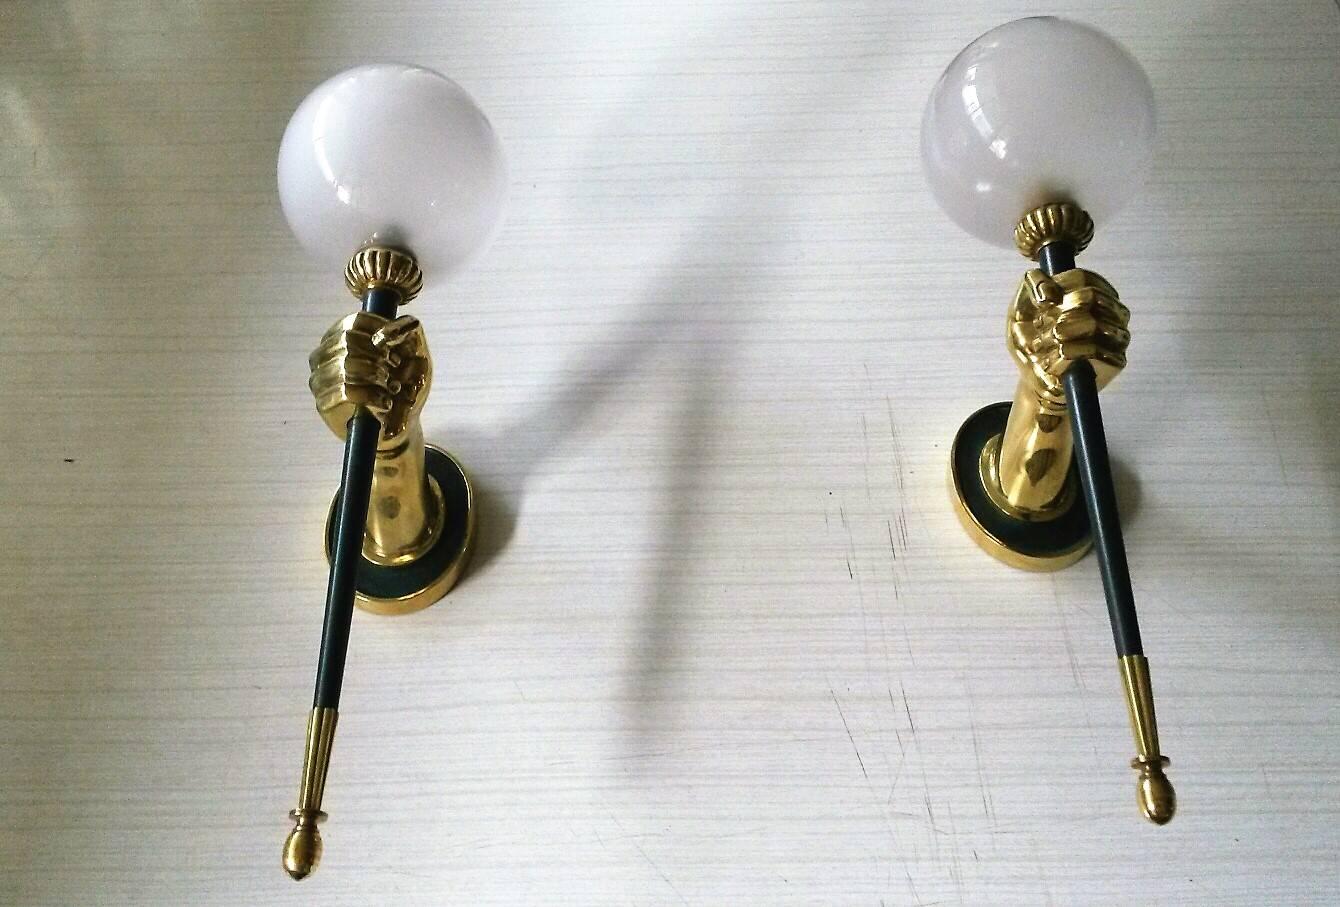 Pair of neoclassical gilt bronze sconces with dark green patina and sandblasted matte white globes. Representing golden hands holding a torch light.
By, Maison Jansen, France, circa 1950s.

In an excellent original condition, the dark green